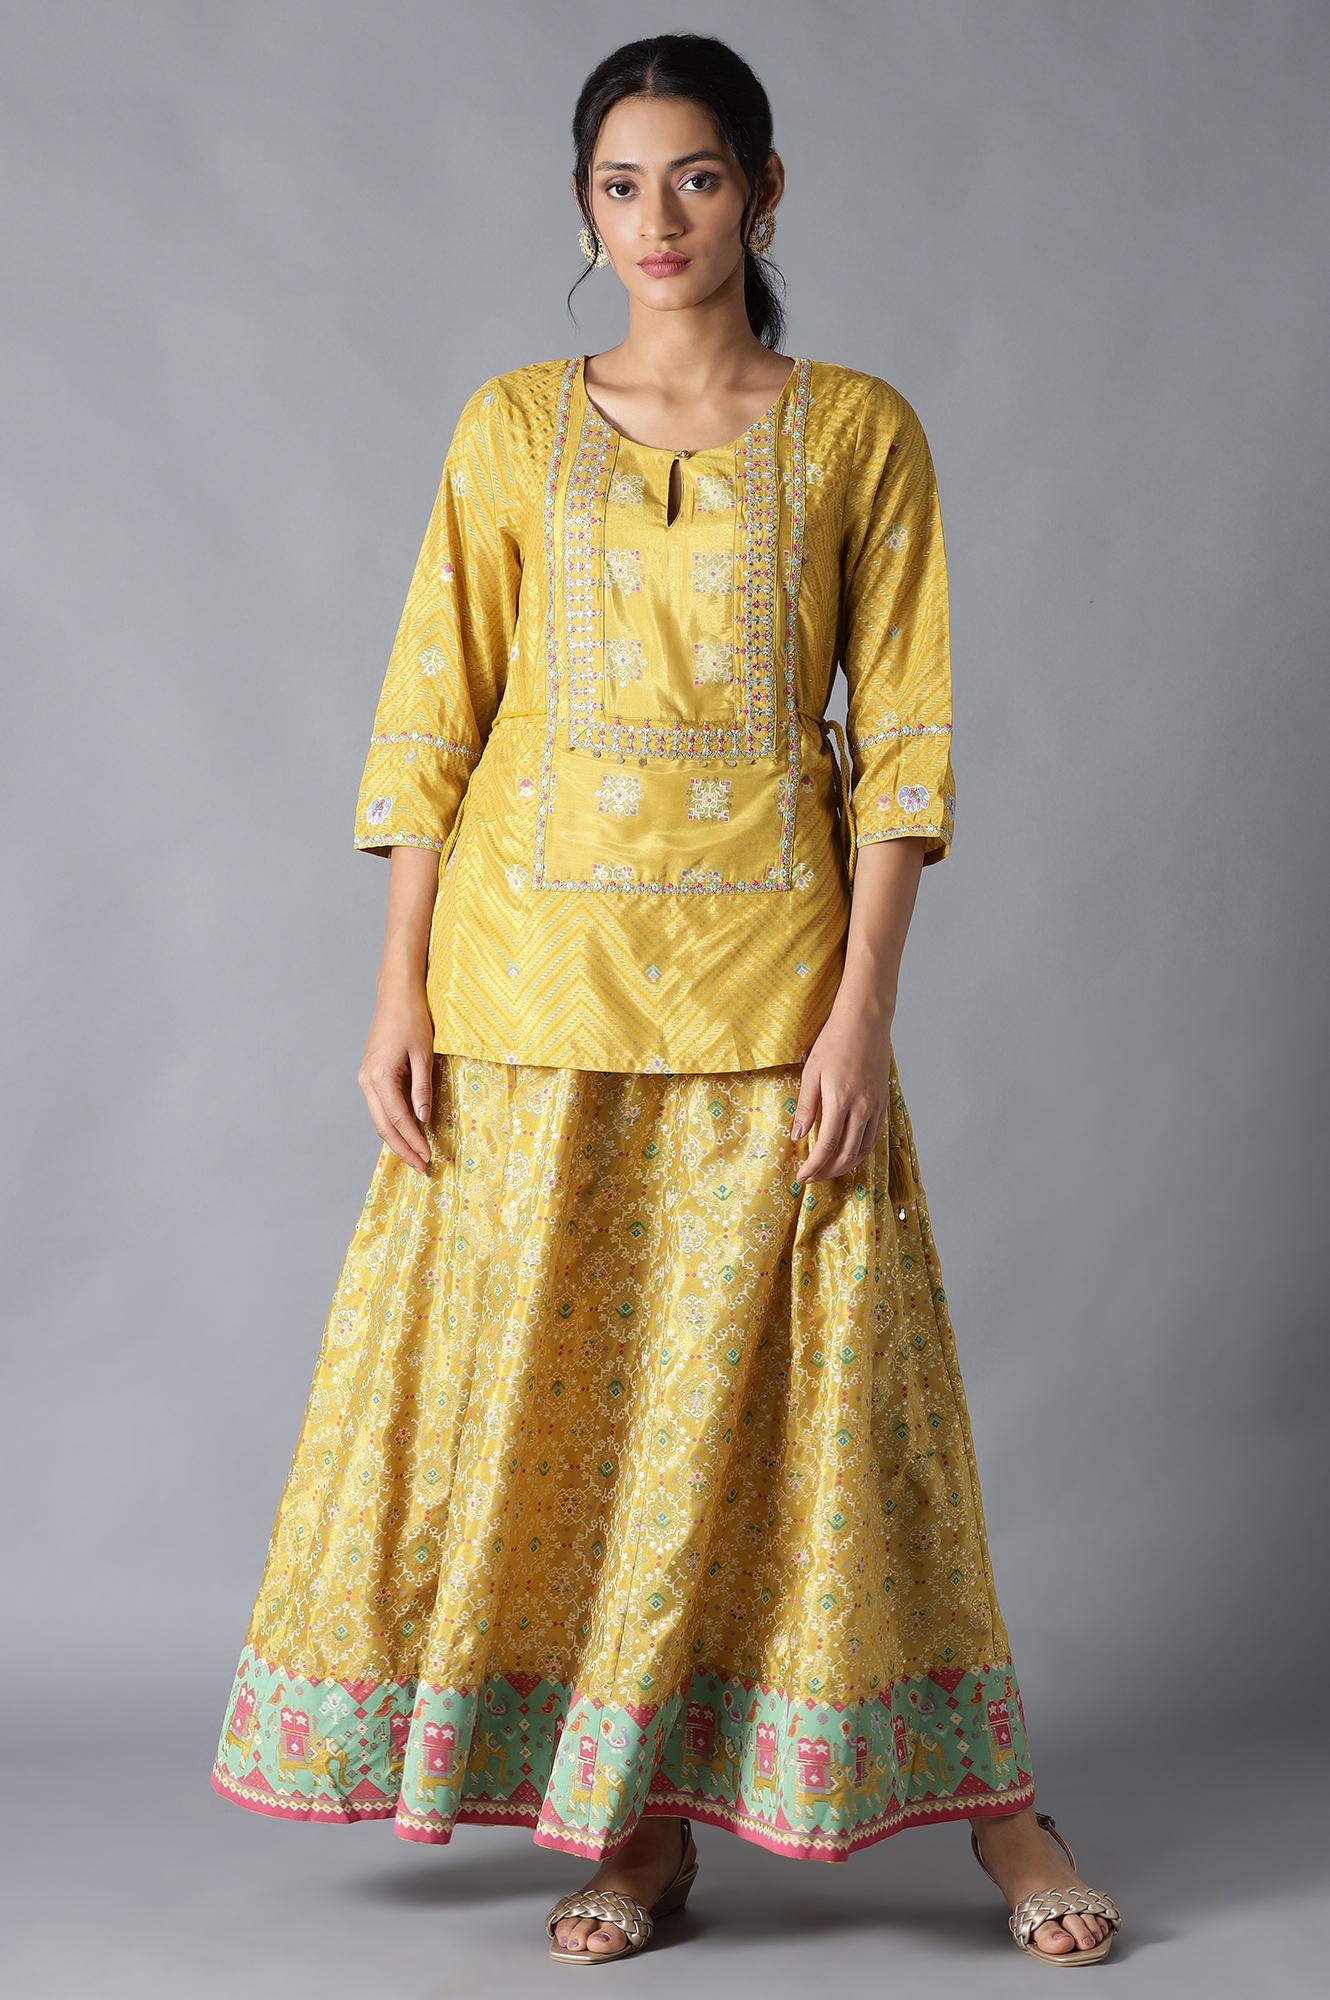 W | W Yellow Printed Attached 'Top and Skirt' Dress